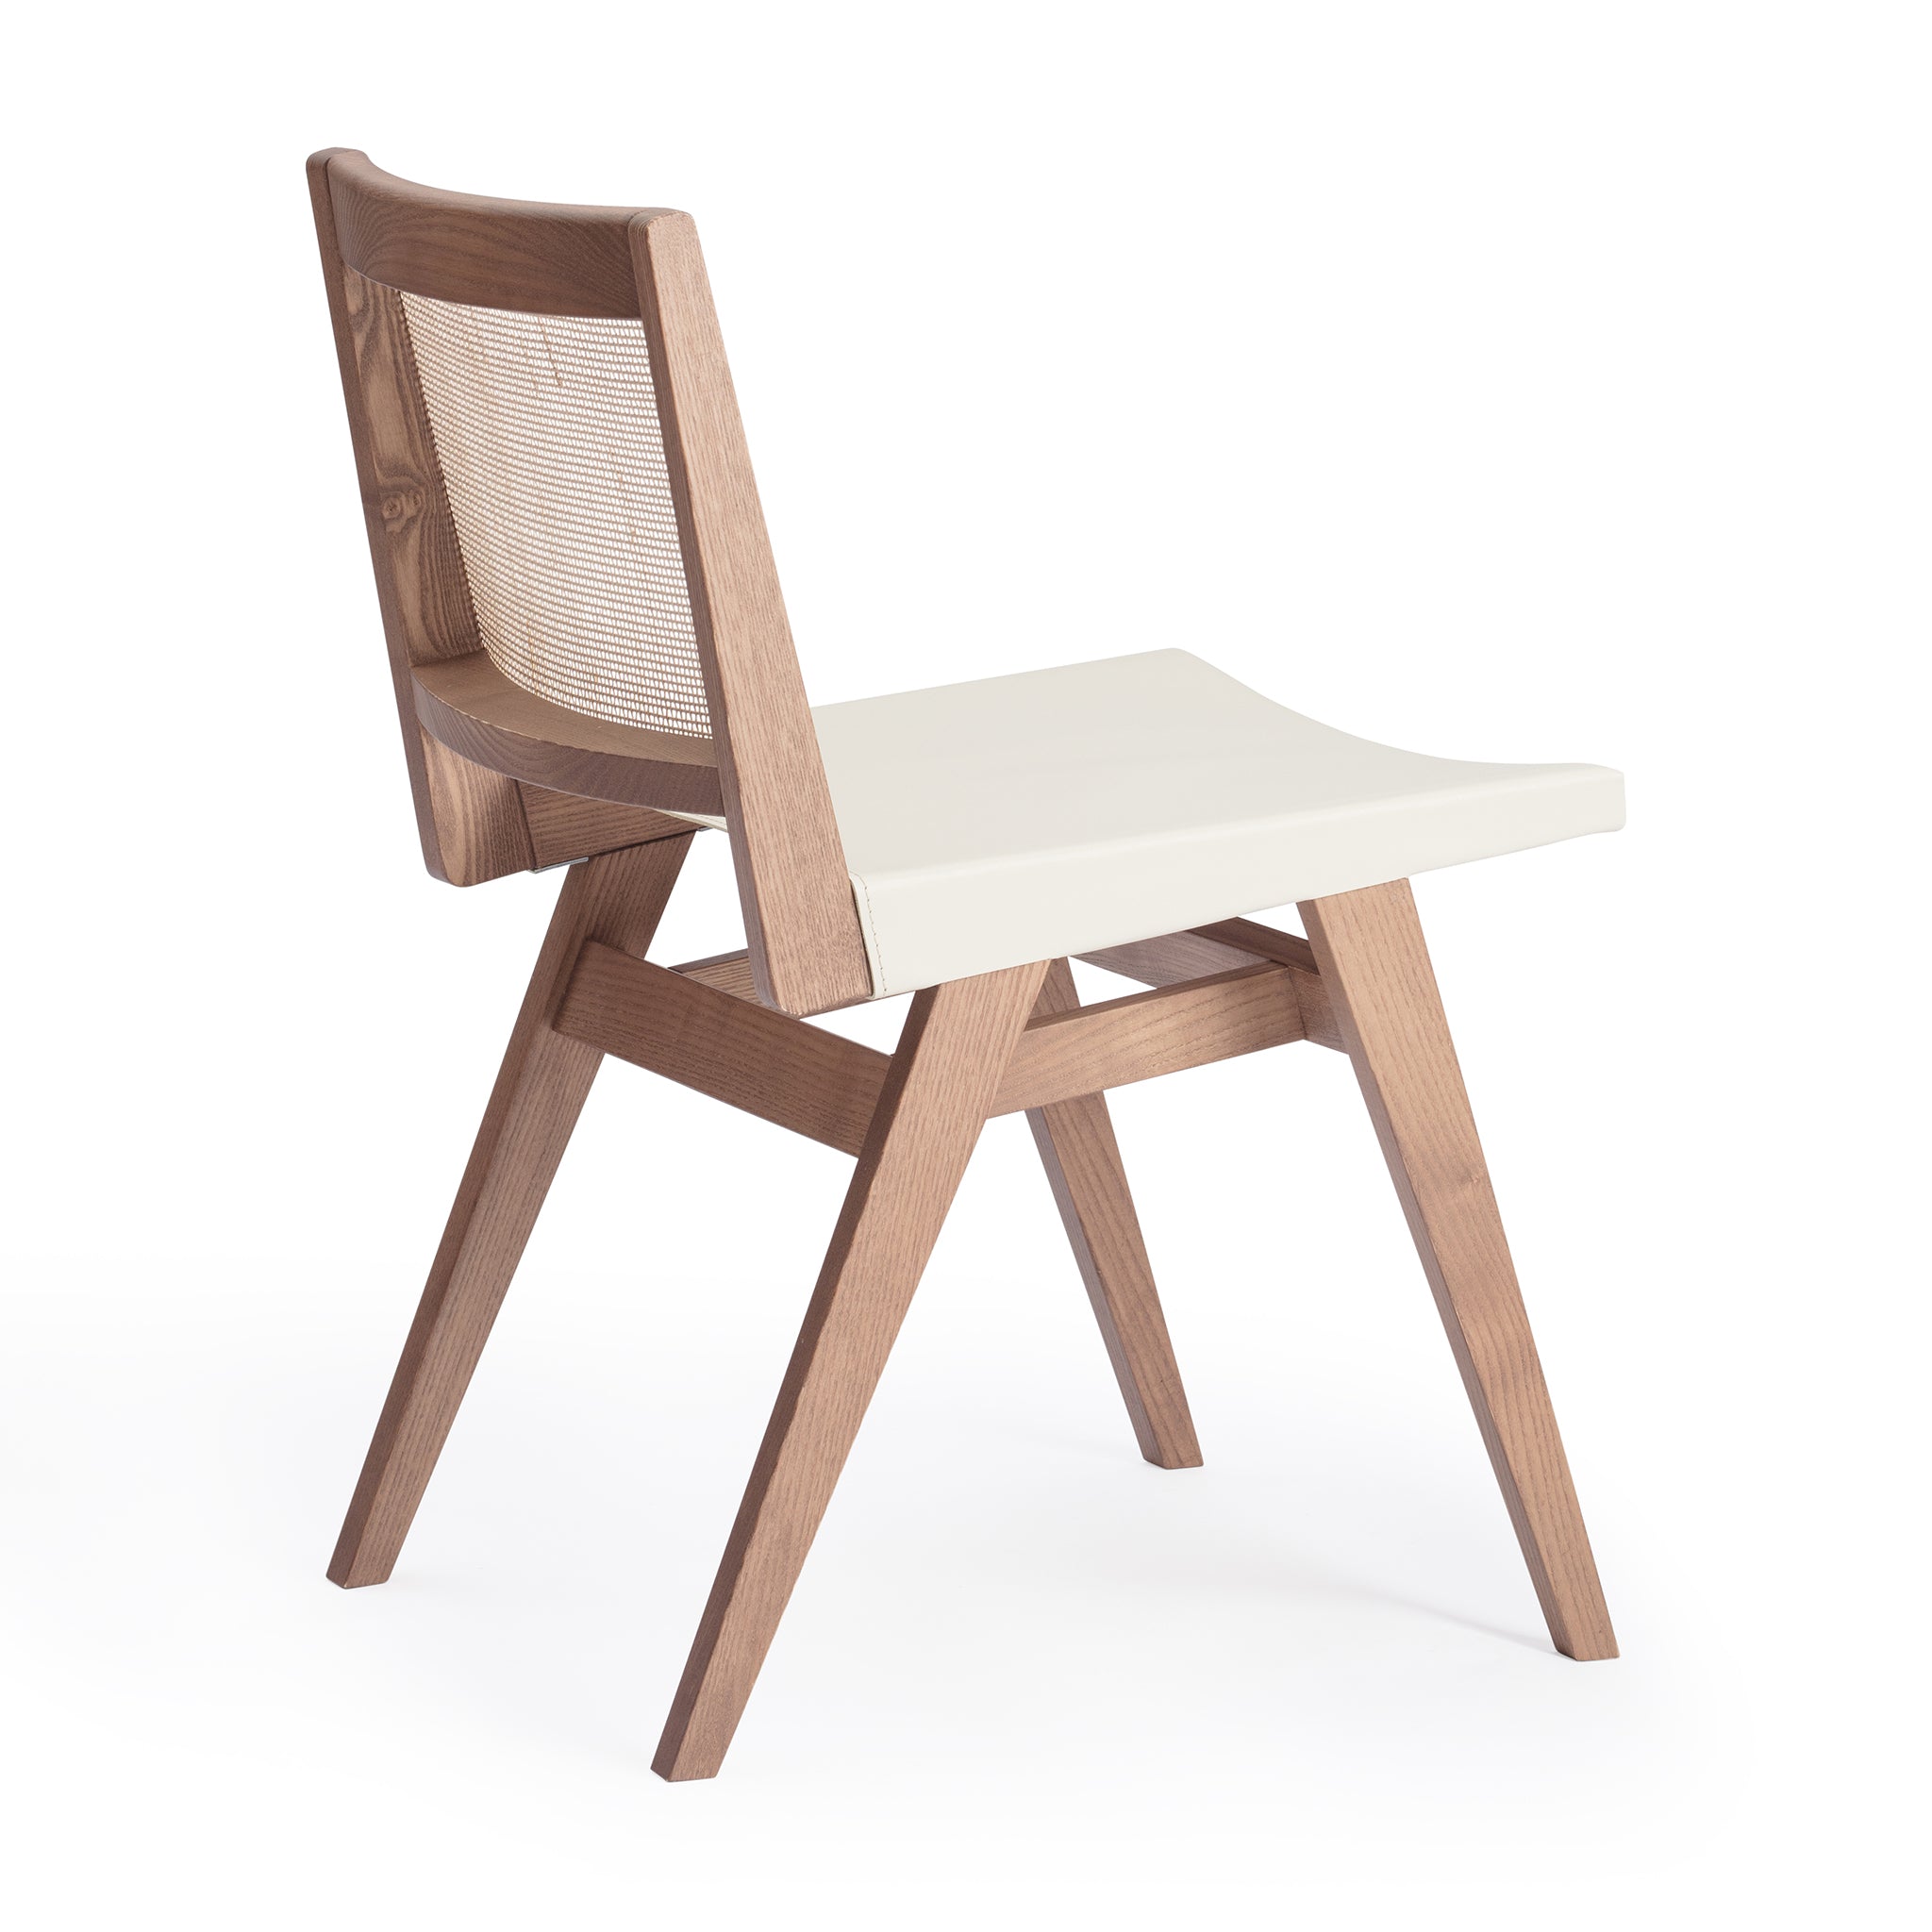 Back view of an "Elye" modern dining chair, walnut stained ash frame, square weave cane back, contract grade off white leather seat, produced by Klarel in Italy. #K41-1